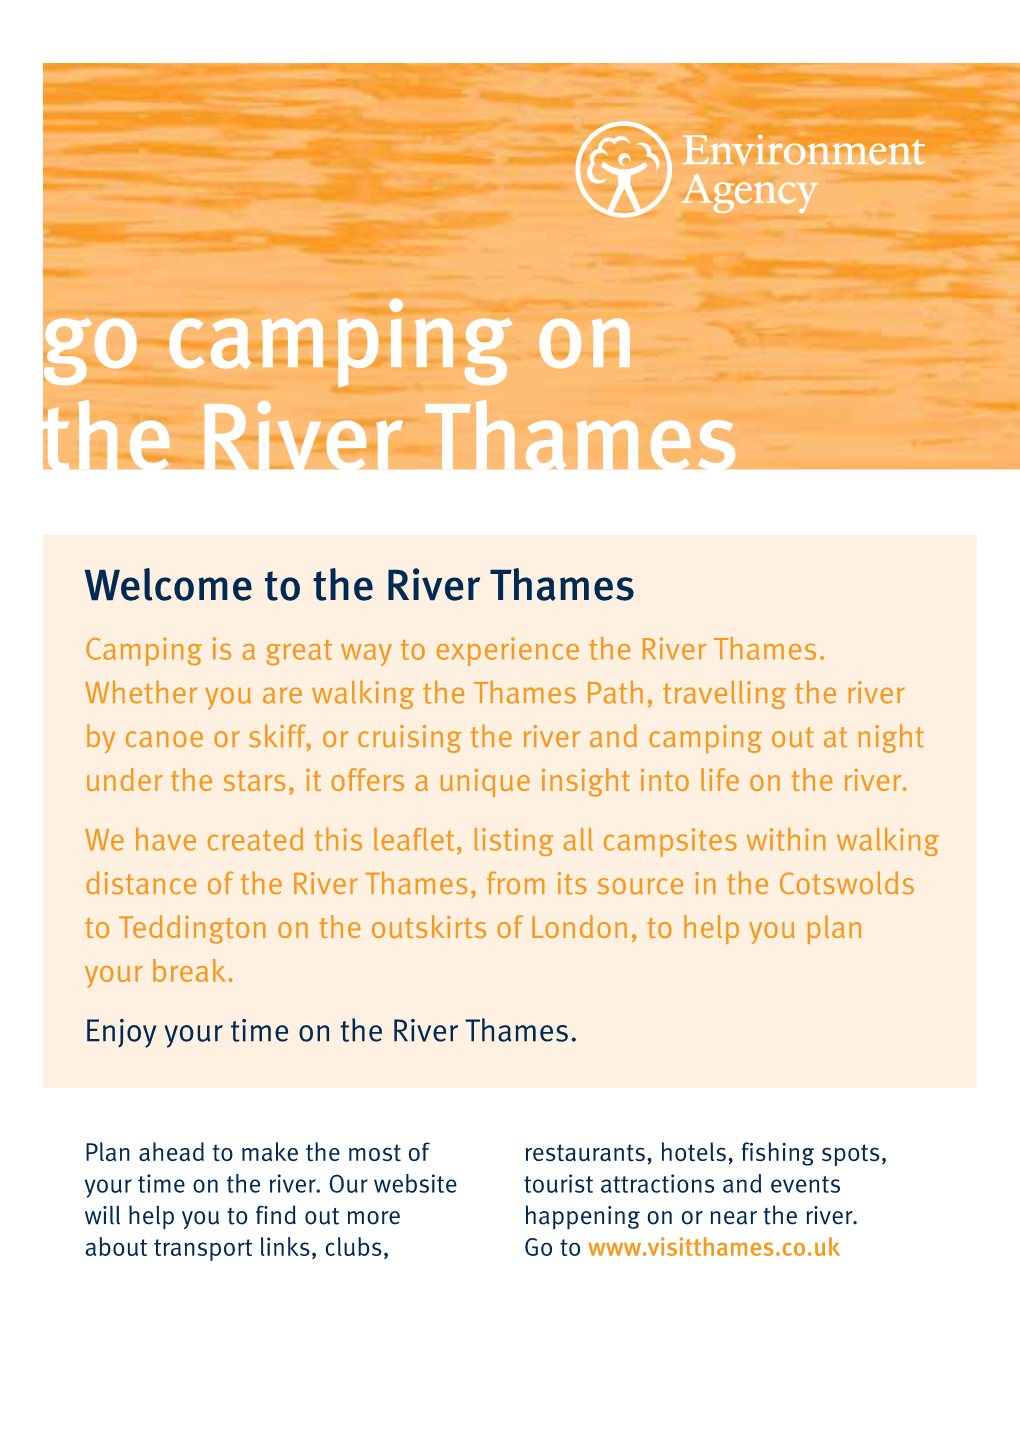 Go Camping on the River Thames